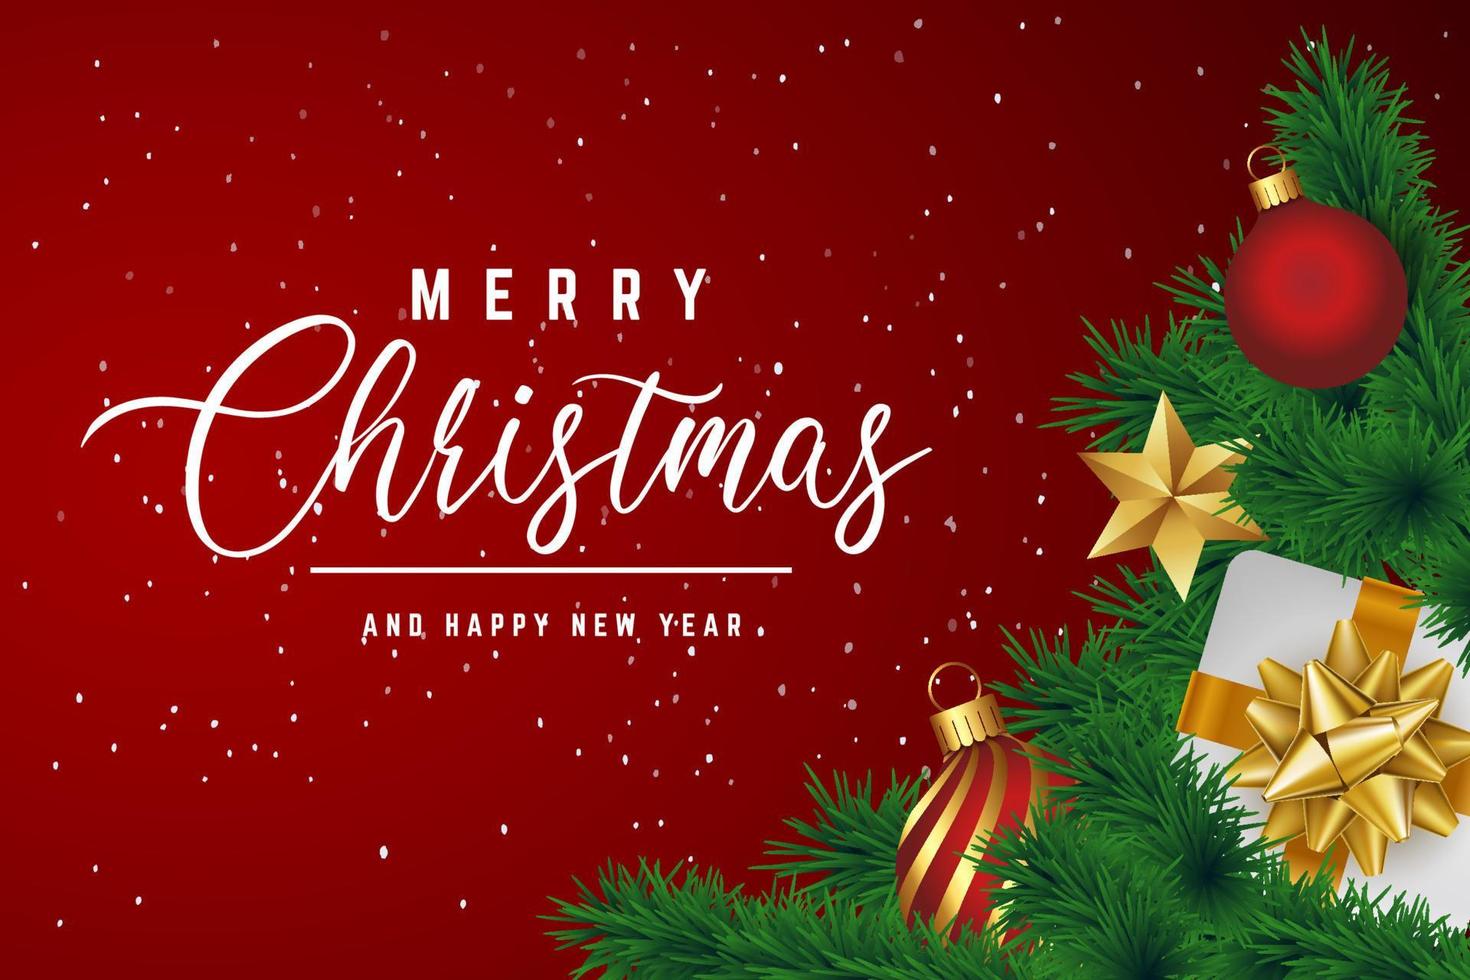 merry christmas background with gift box and ball lamp vector